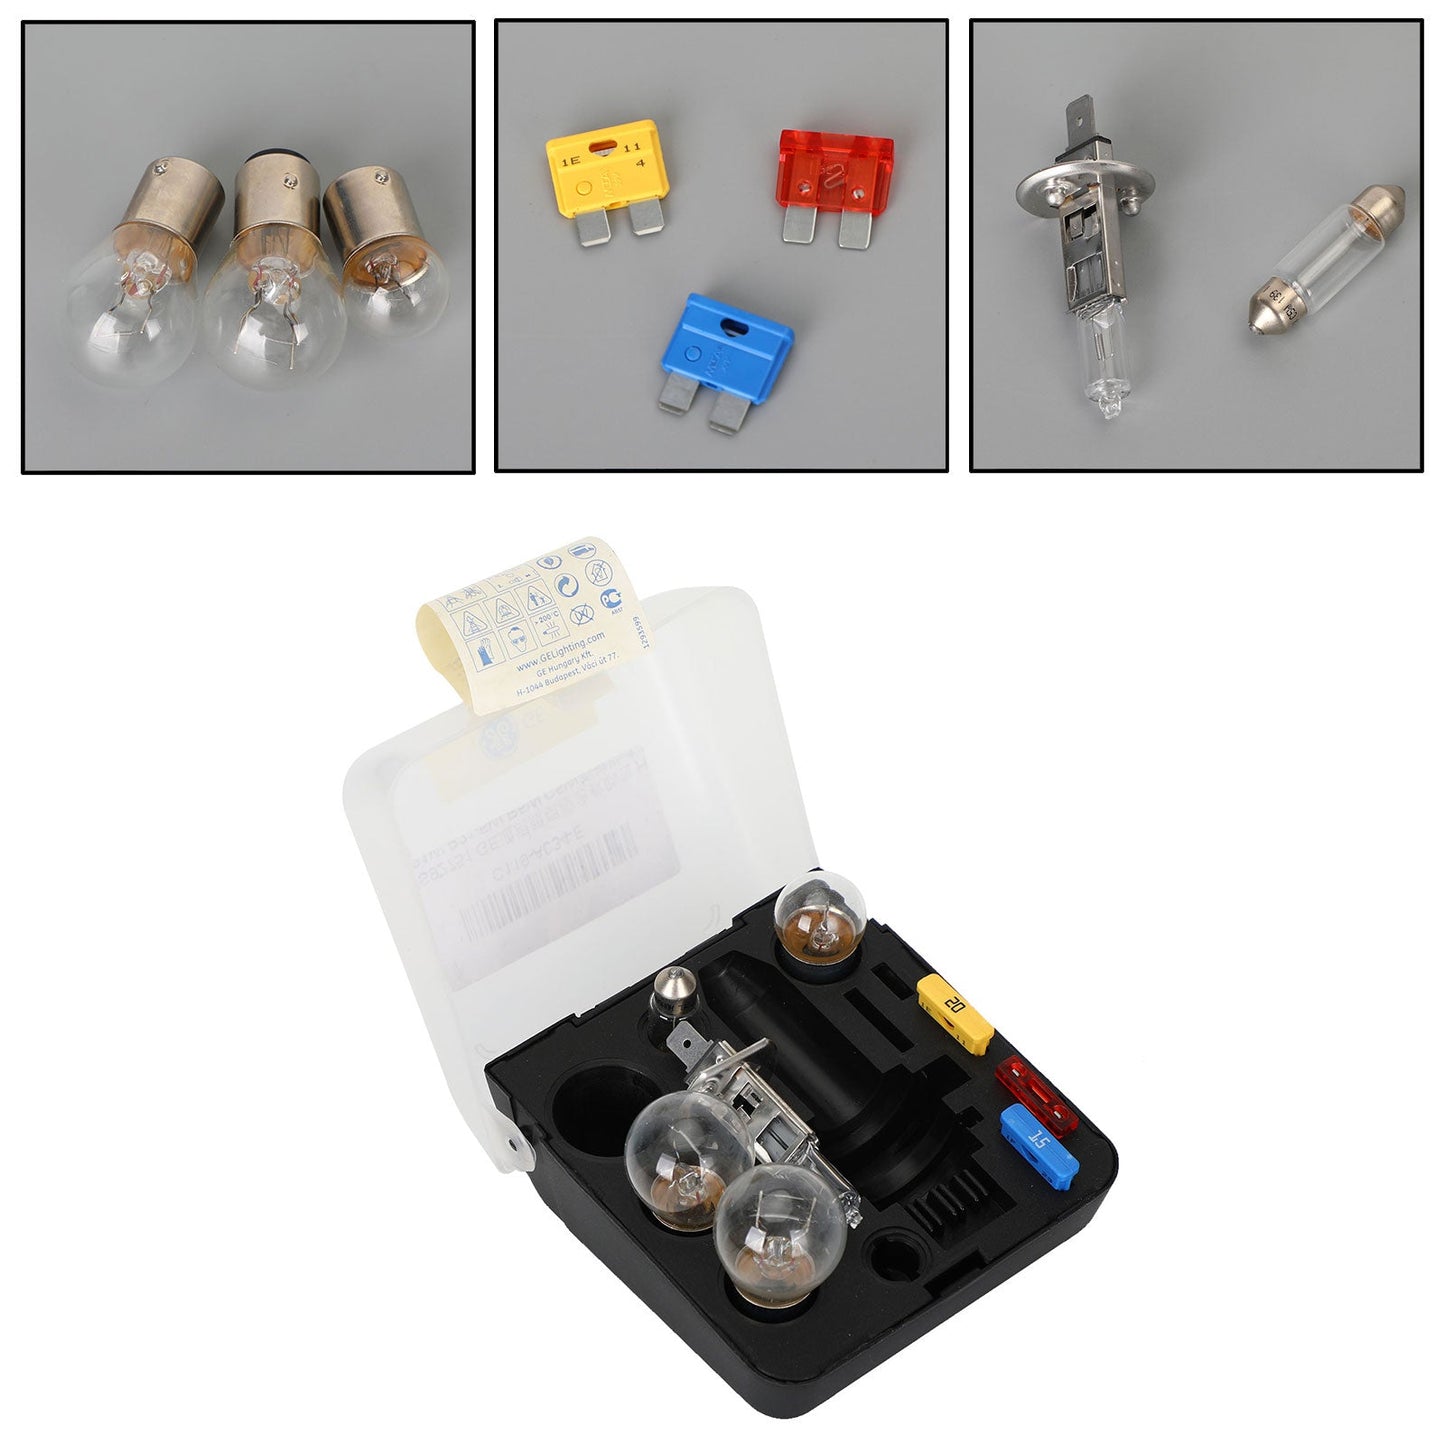 For GE General Lighting Emergency Rescue Kit Fuse H1 P21W P21/5W R5W C5W